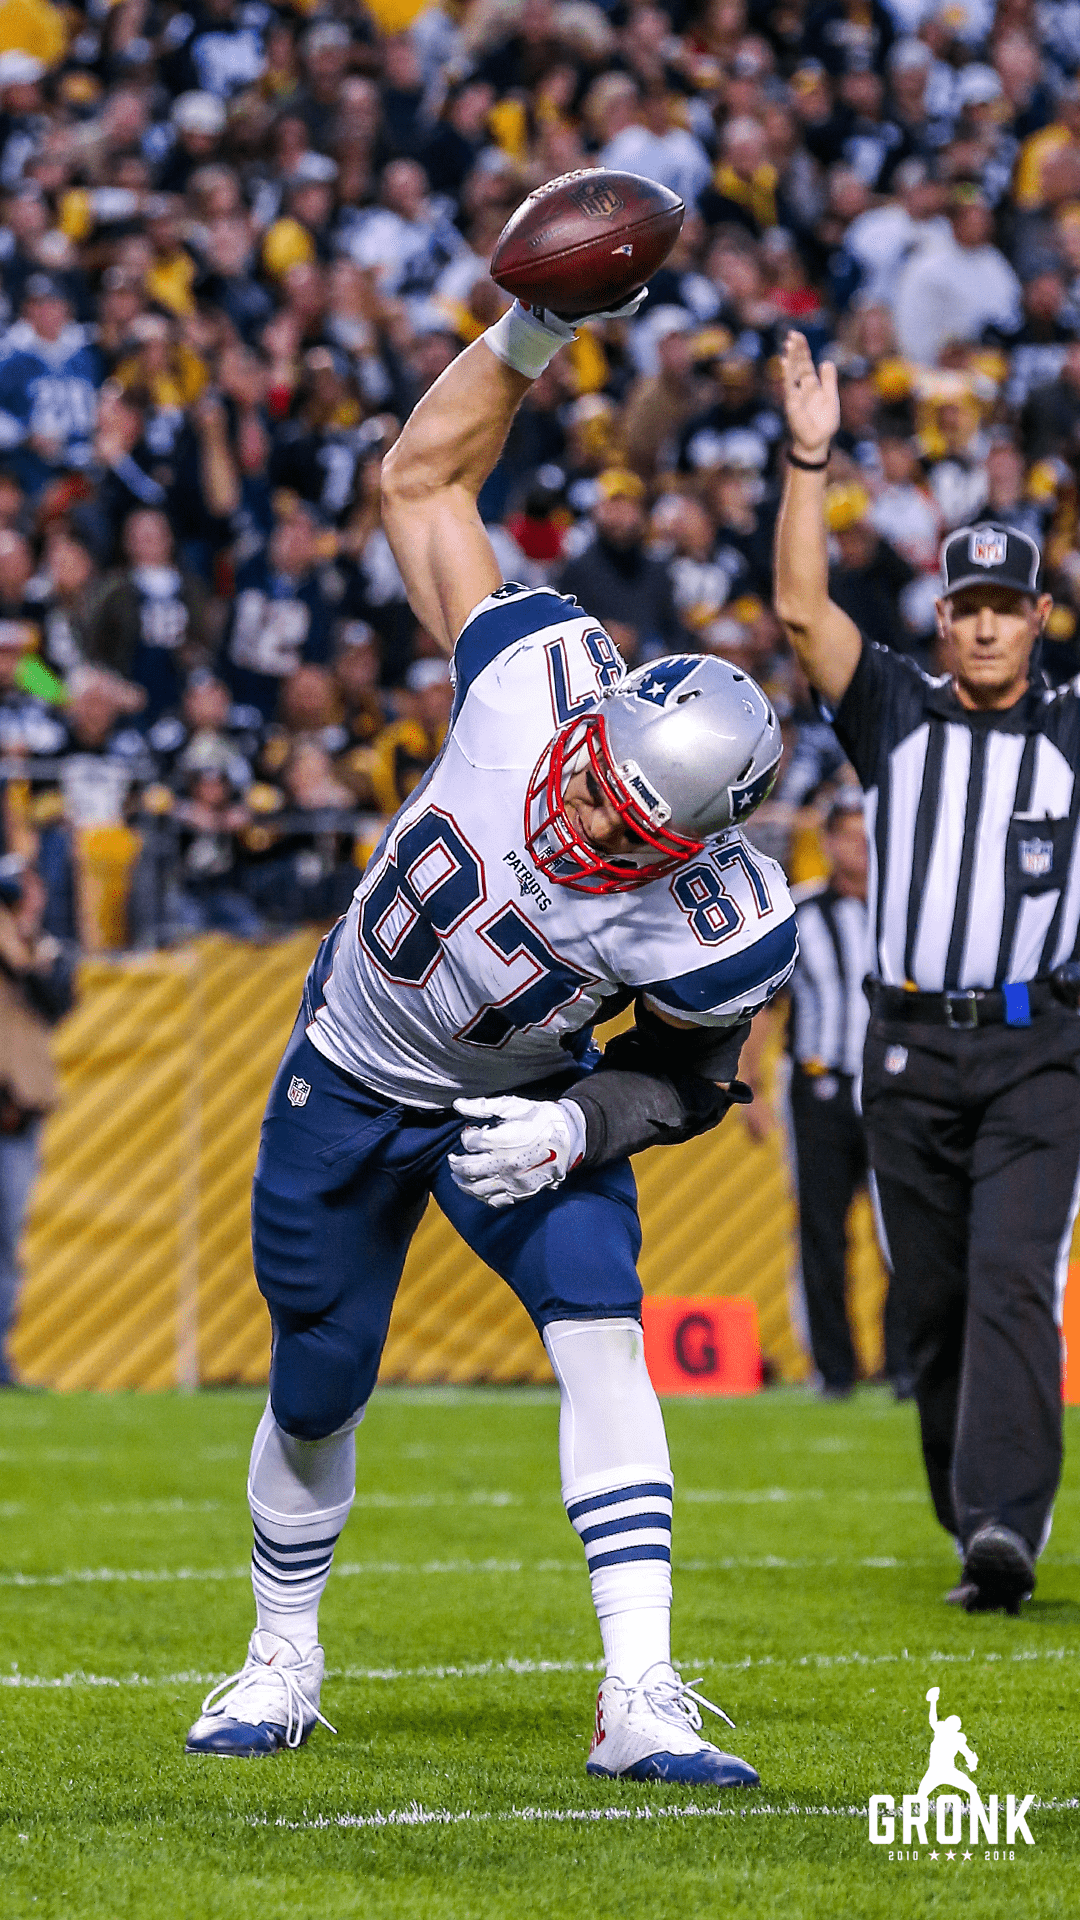 Rob Gronkowski Wallpapers  Top 31 Best Rob Gronkowski Wallpapers  HQ 